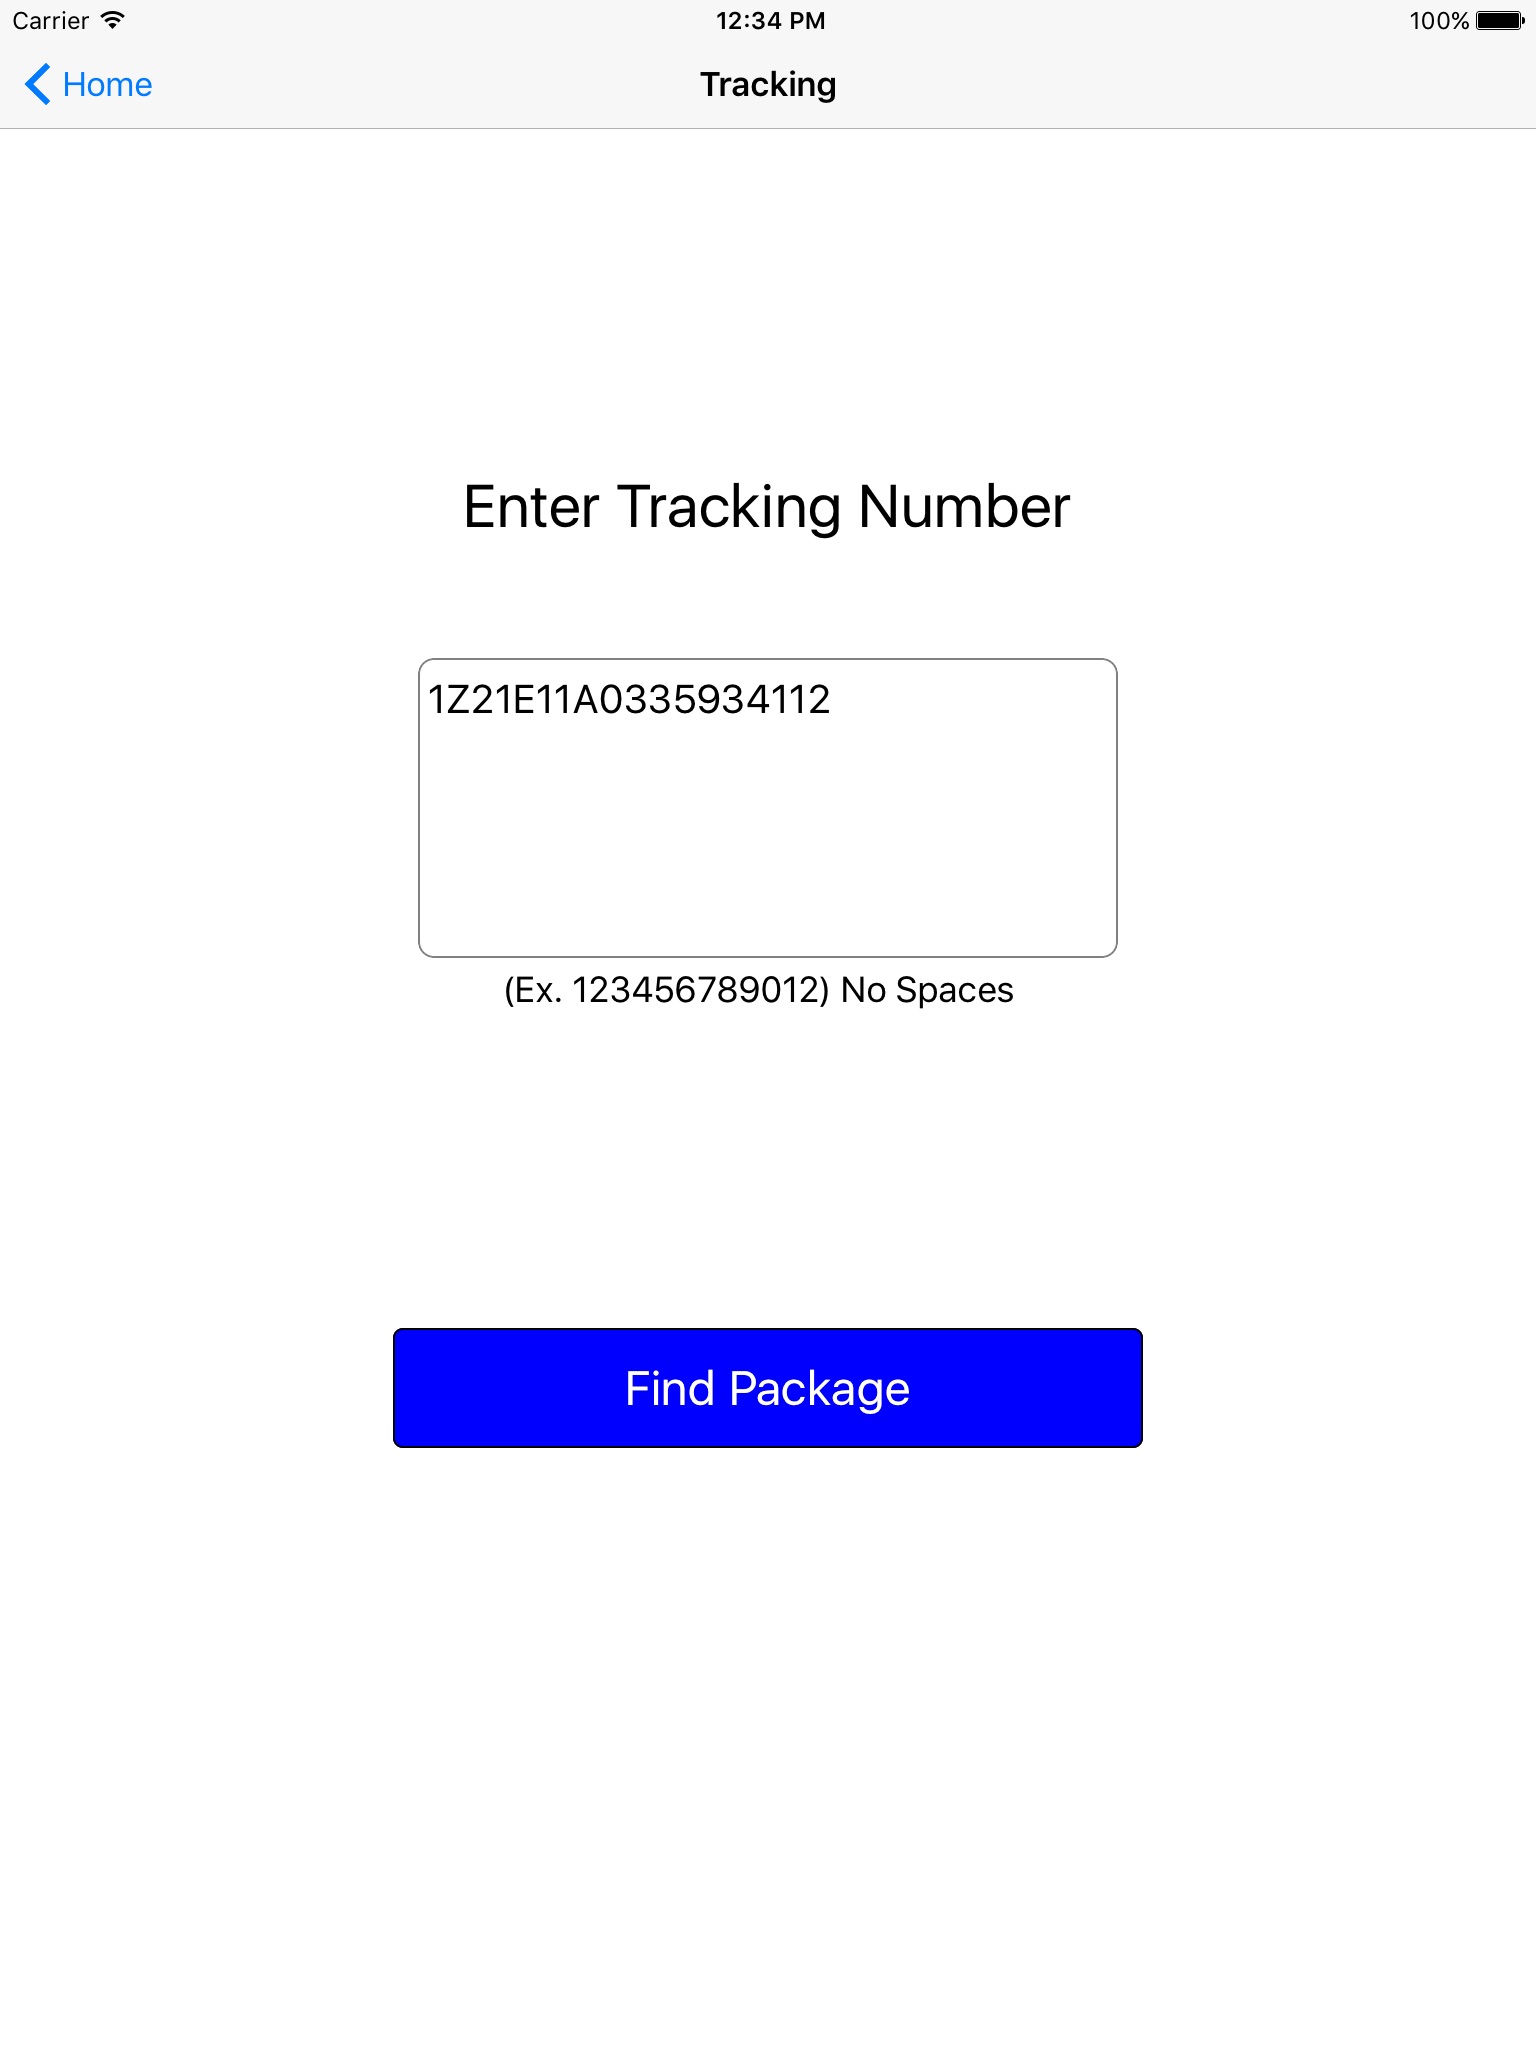 ShipQ - parcel post shipping rates, track packages screenshot 2